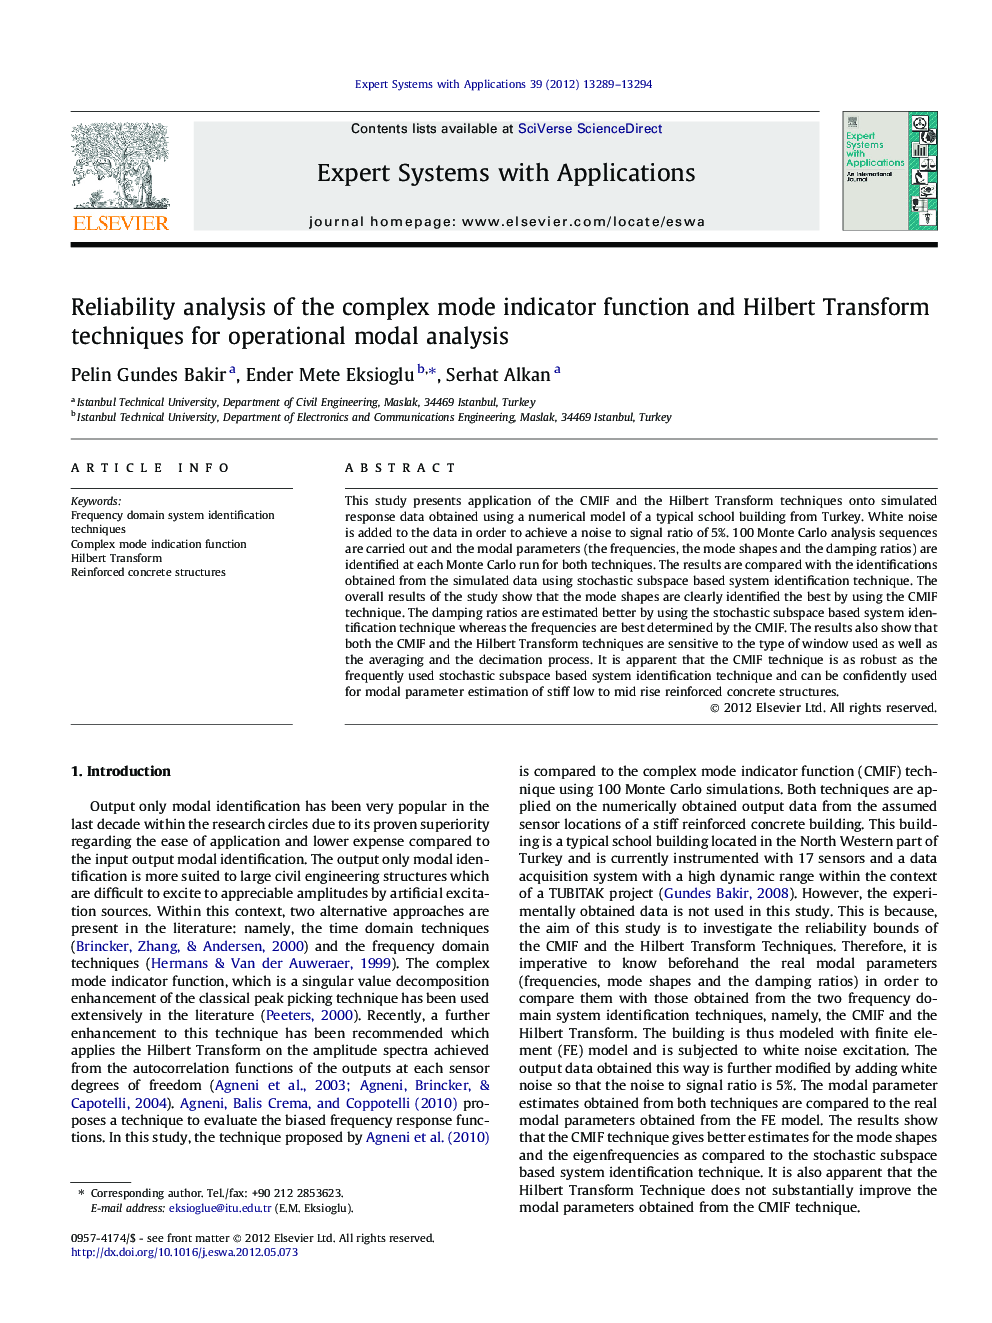 Reliability analysis of the complex mode indicator function and Hilbert Transform techniques for operational modal analysis